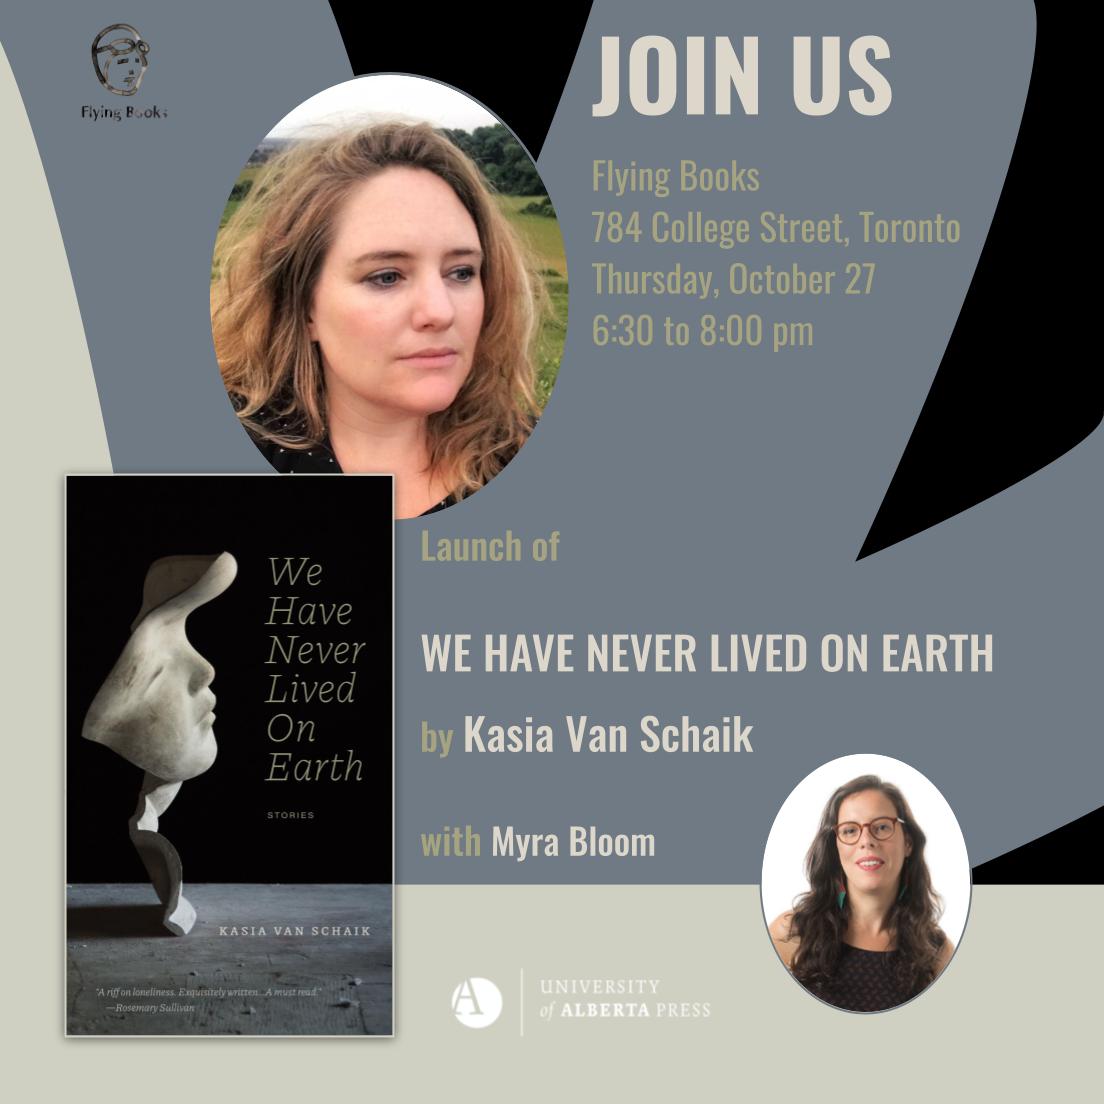 Tomorrow, the author of WE HAVE NEVER LIVED ON EARTH, Kasia Van Schaik, will be in conversation with literary critic, Myra Bloom, on October 27 at 6:30 pm at Flying Books, 784 College Street, Toronto. It will be a riveting discussion! @flyingbooks_to @KasiaJuno @myradbloom